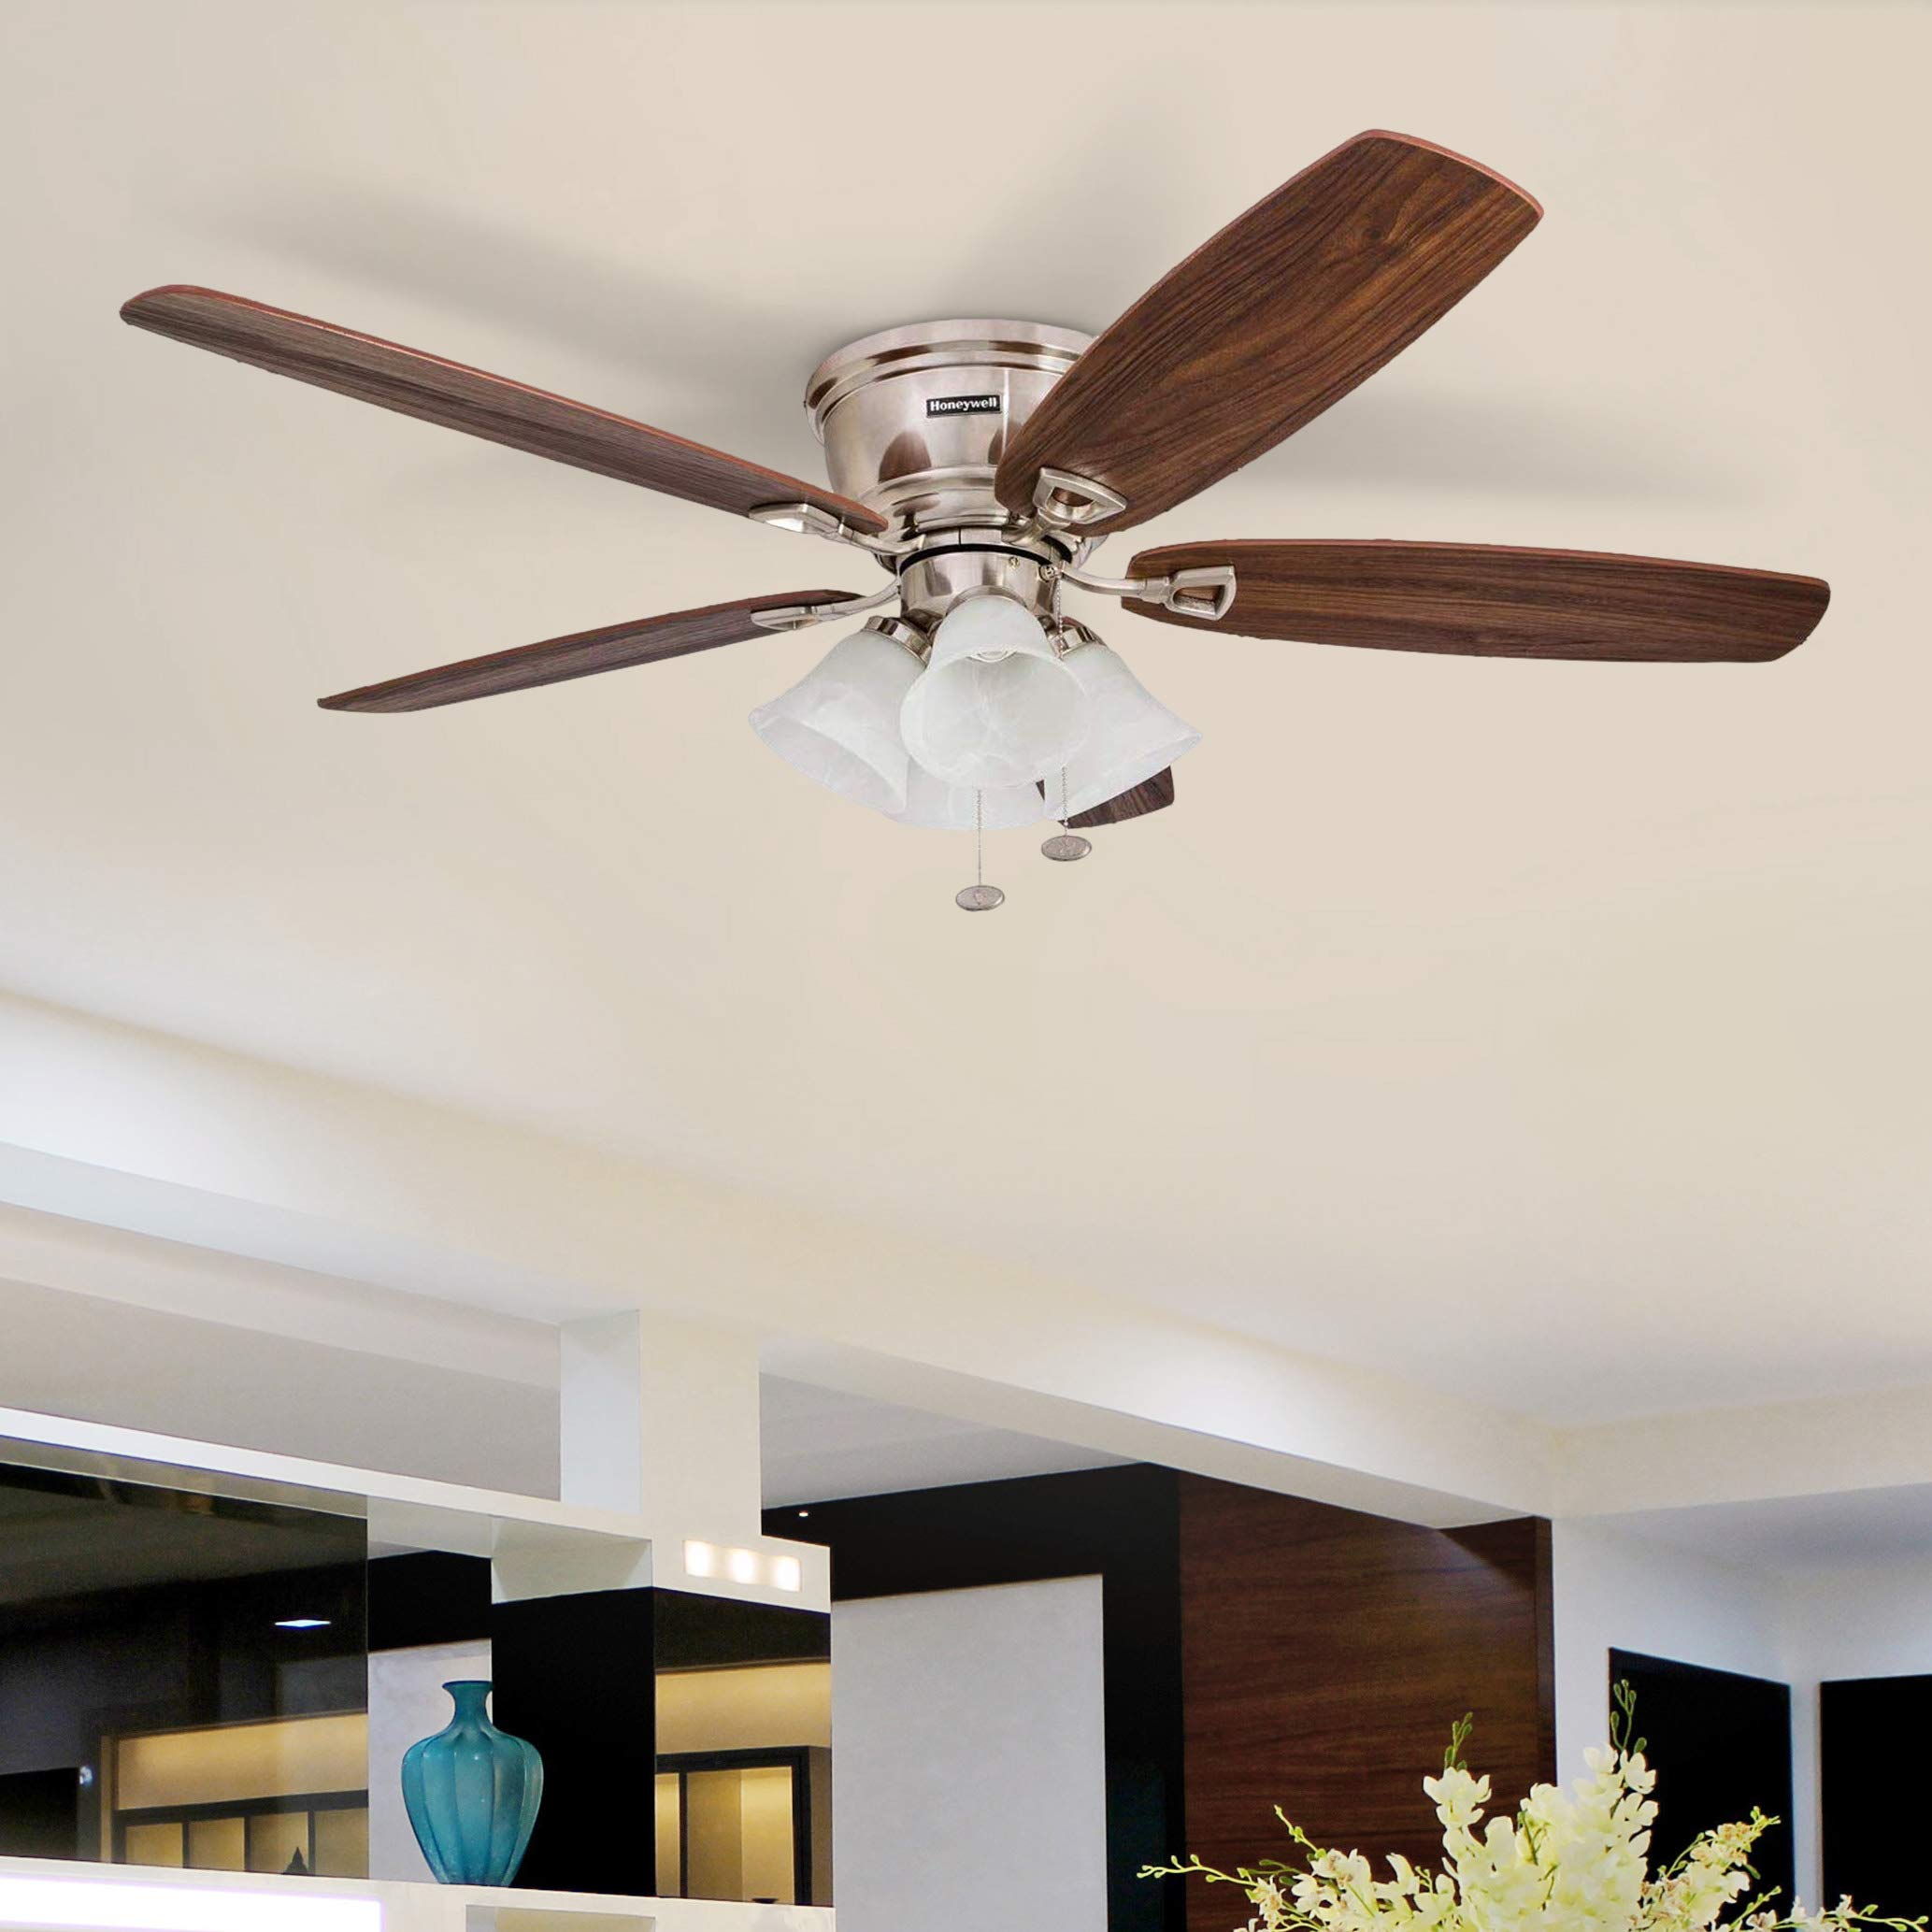 Honeywell Ceiling Fans Glen Alden, 52 Inch Classic Flush Mount Indoor LED Ceiling Fan with Light, Pull Chain, Quick-2-Hang Dual Finish Blades, Reversible Motor - 50182 (Brushed Nickel)